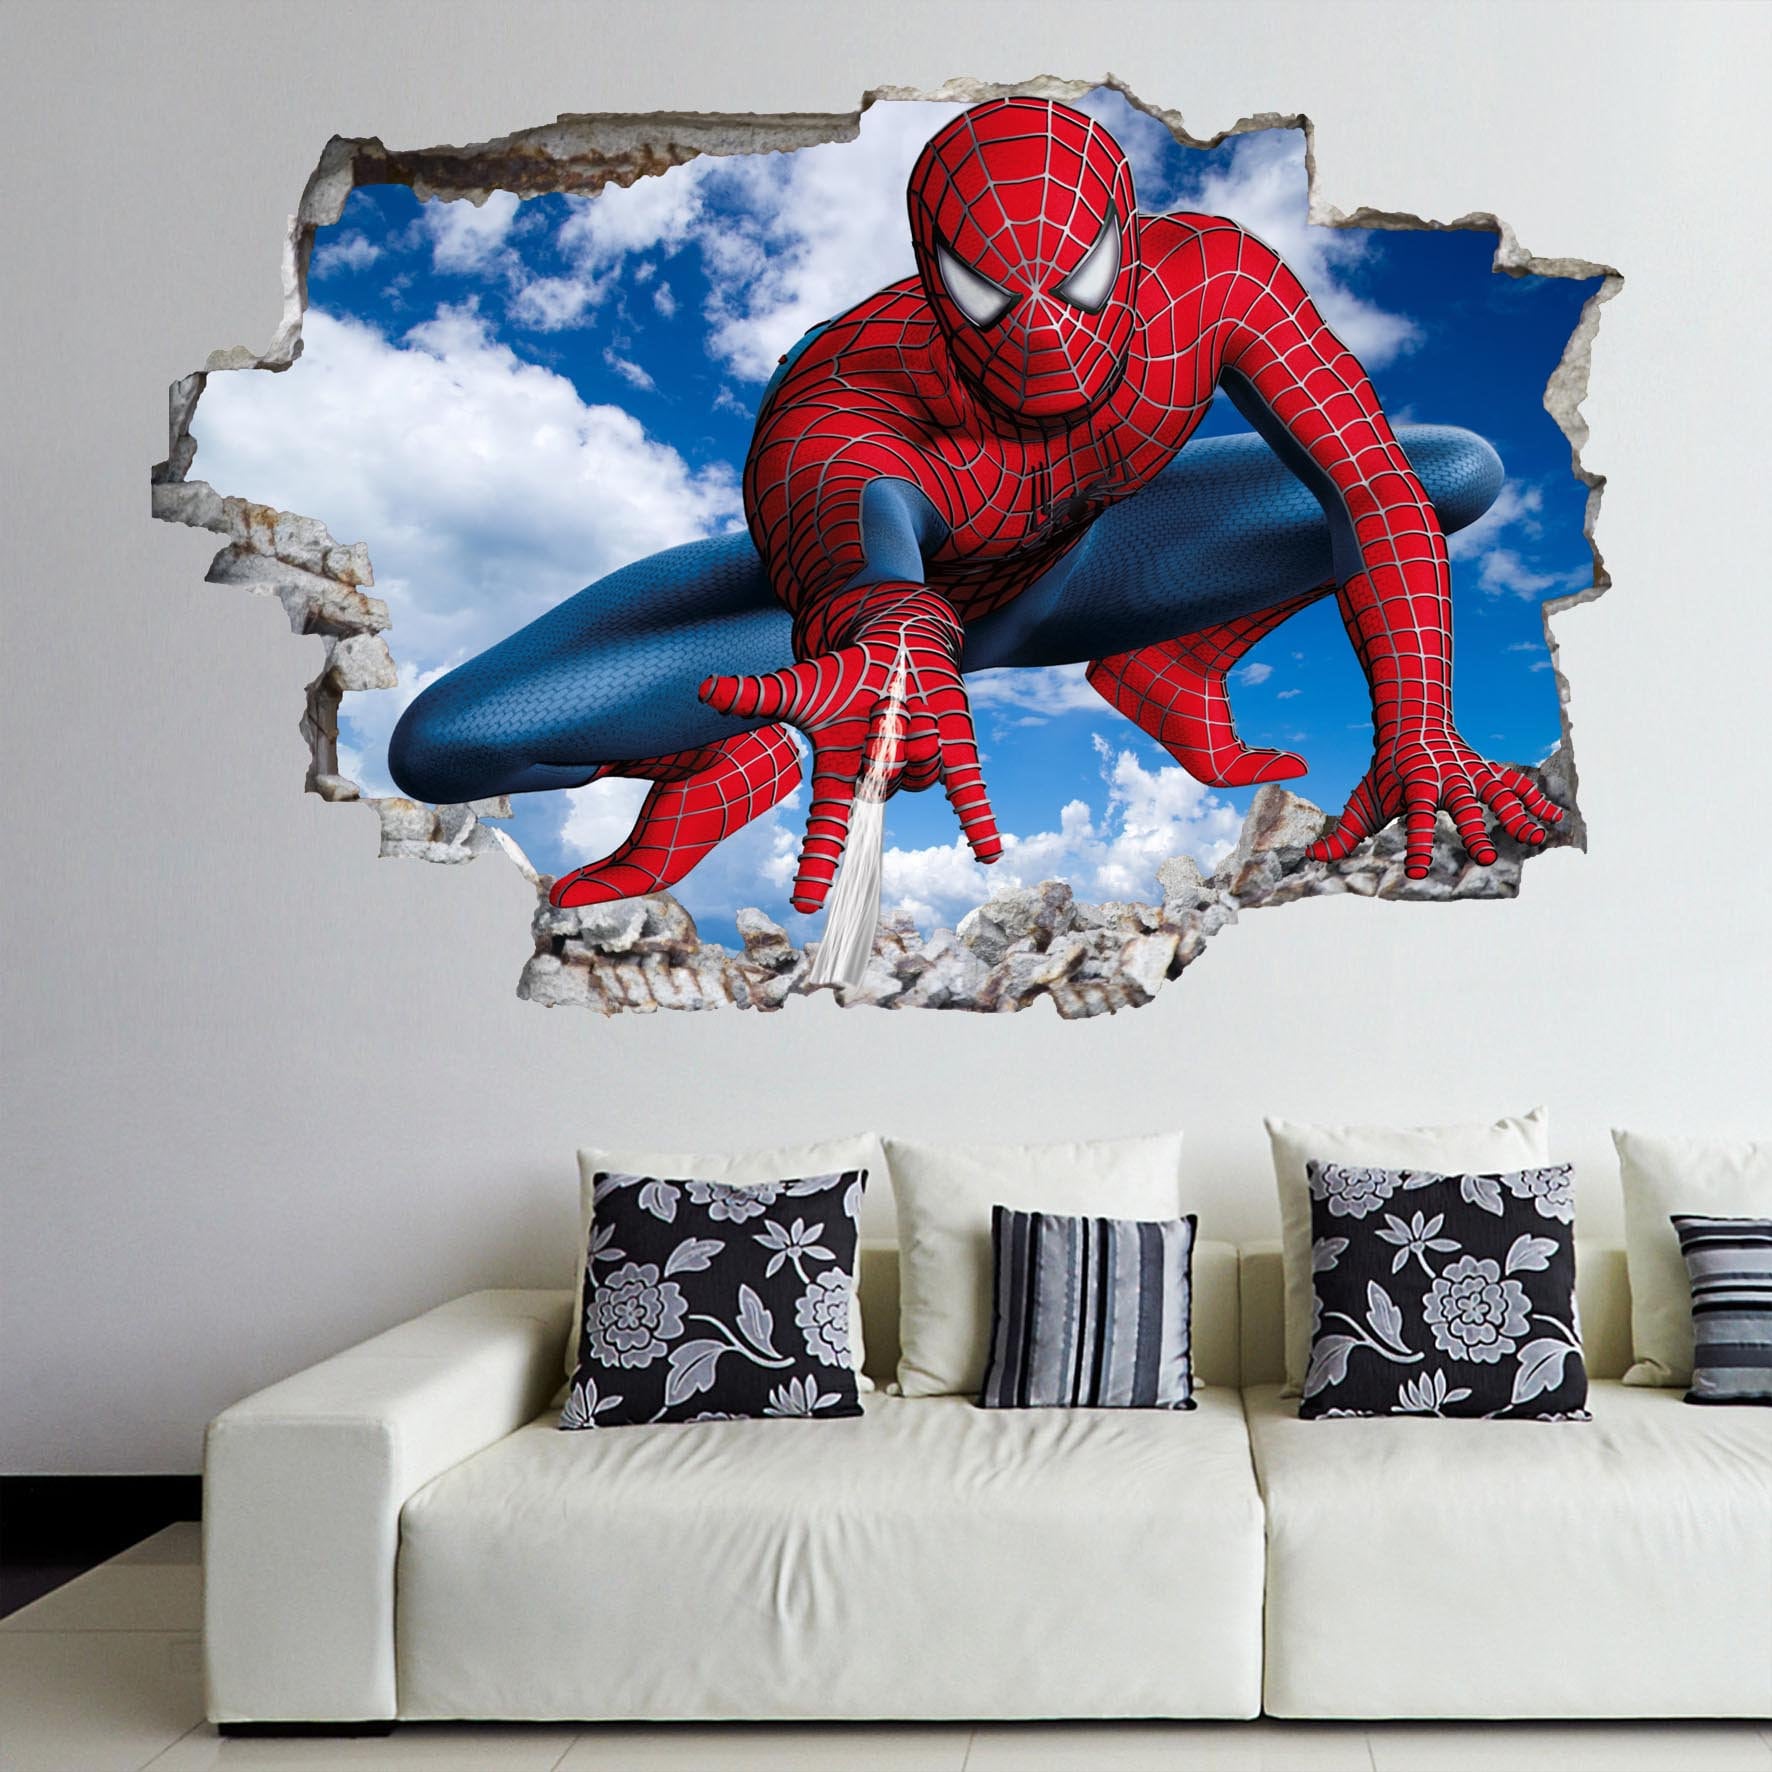 AMAZING SPIDERMAN ~REMOVABLE WALL STICKERS DECALS~ 